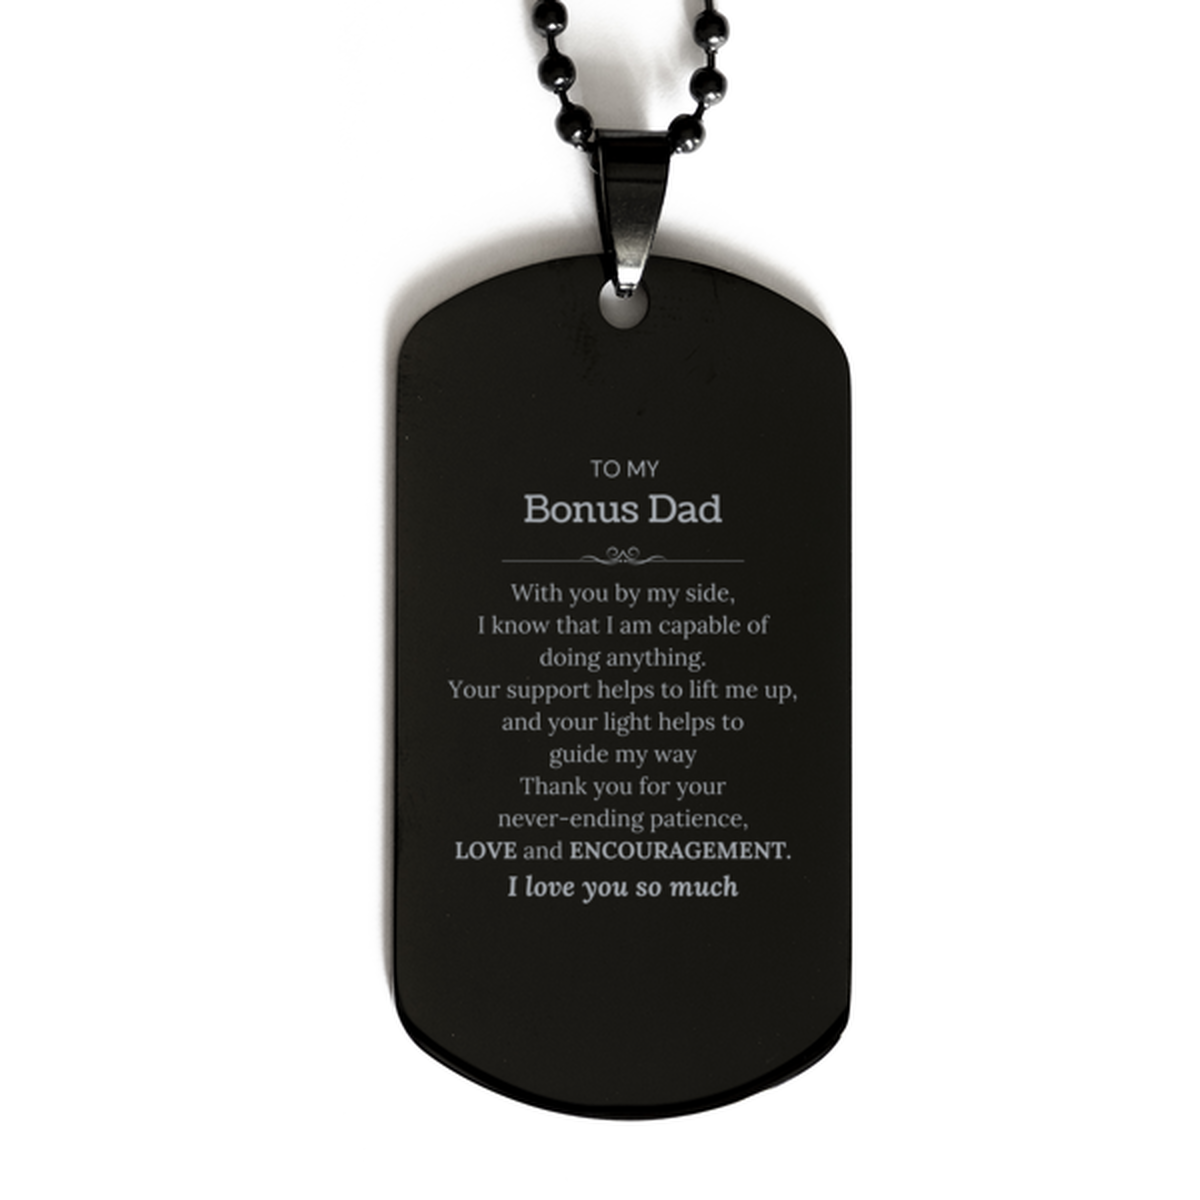 Appreciation Bonus Dad Black Dog Tag Gifts, To My Bonus Dad Birthday Christmas Wedding Keepsake Gifts for Bonus Dad With you by my side, I know that I am capable of doing anything. I love you so much